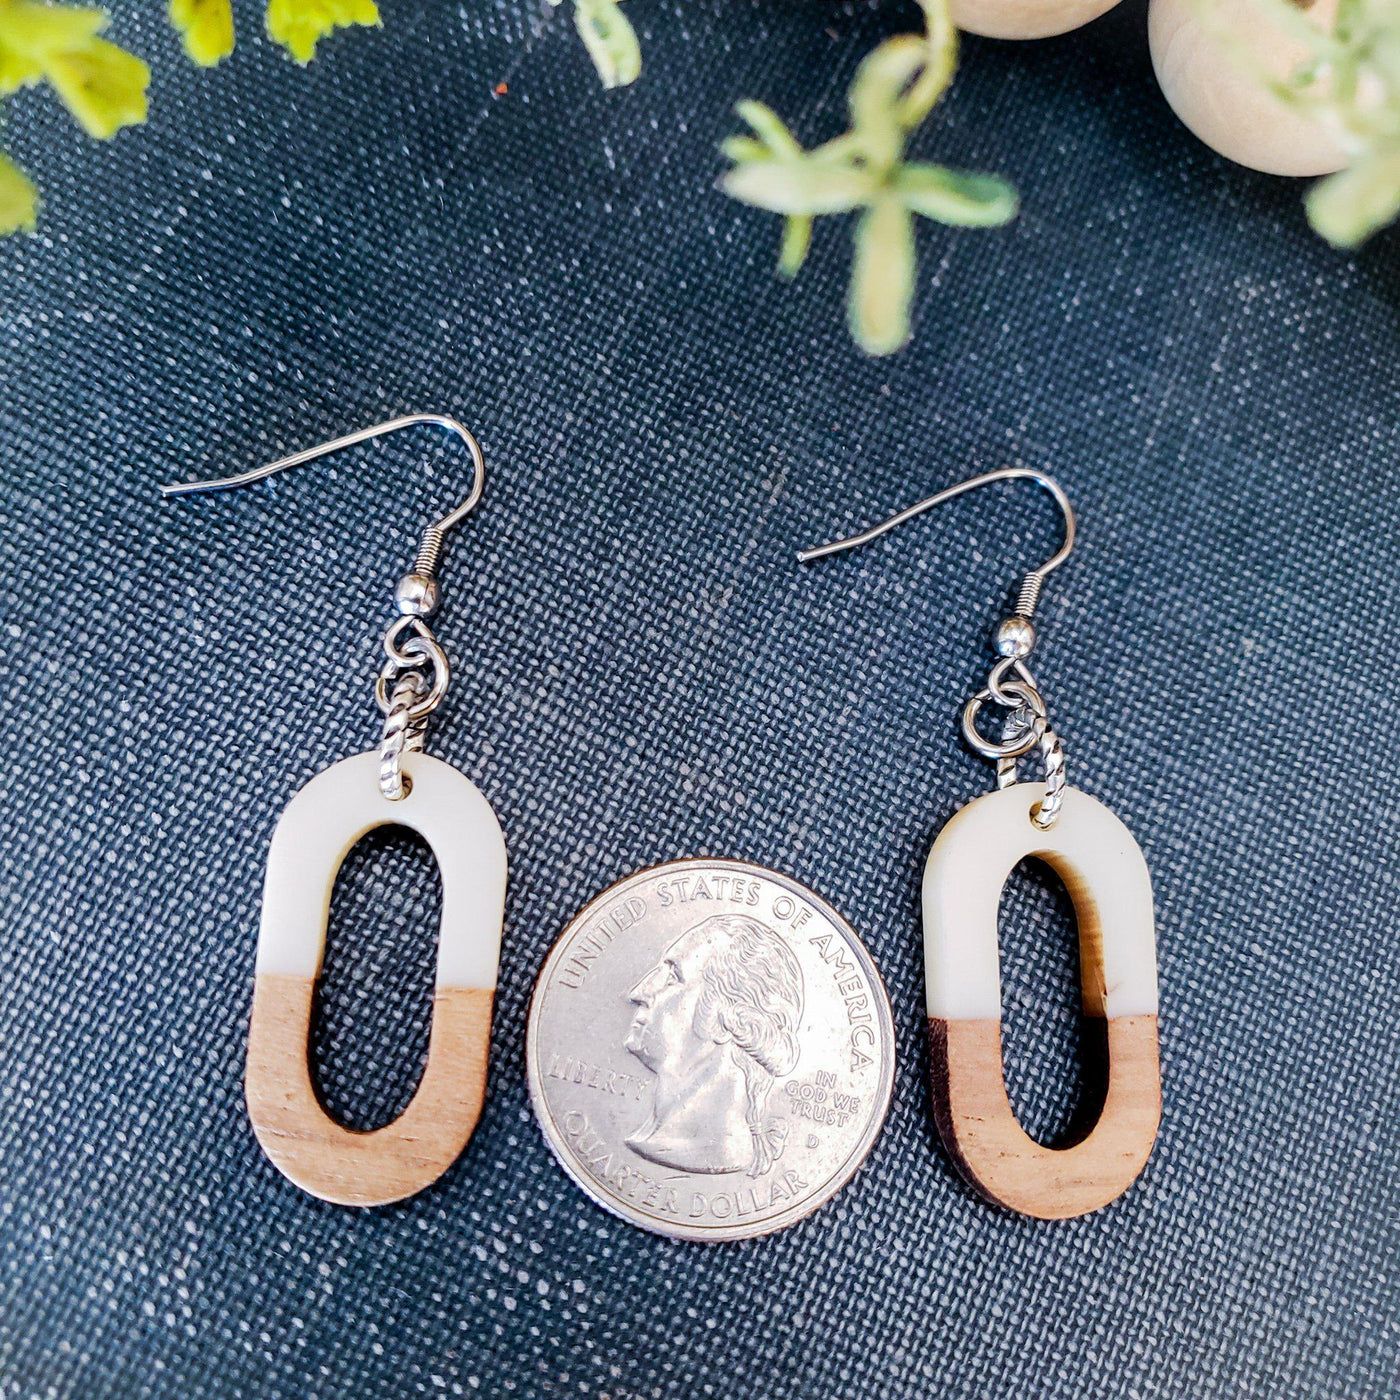 Wood and White Oval Resin Earrings - Little Blue Bus Jewelry